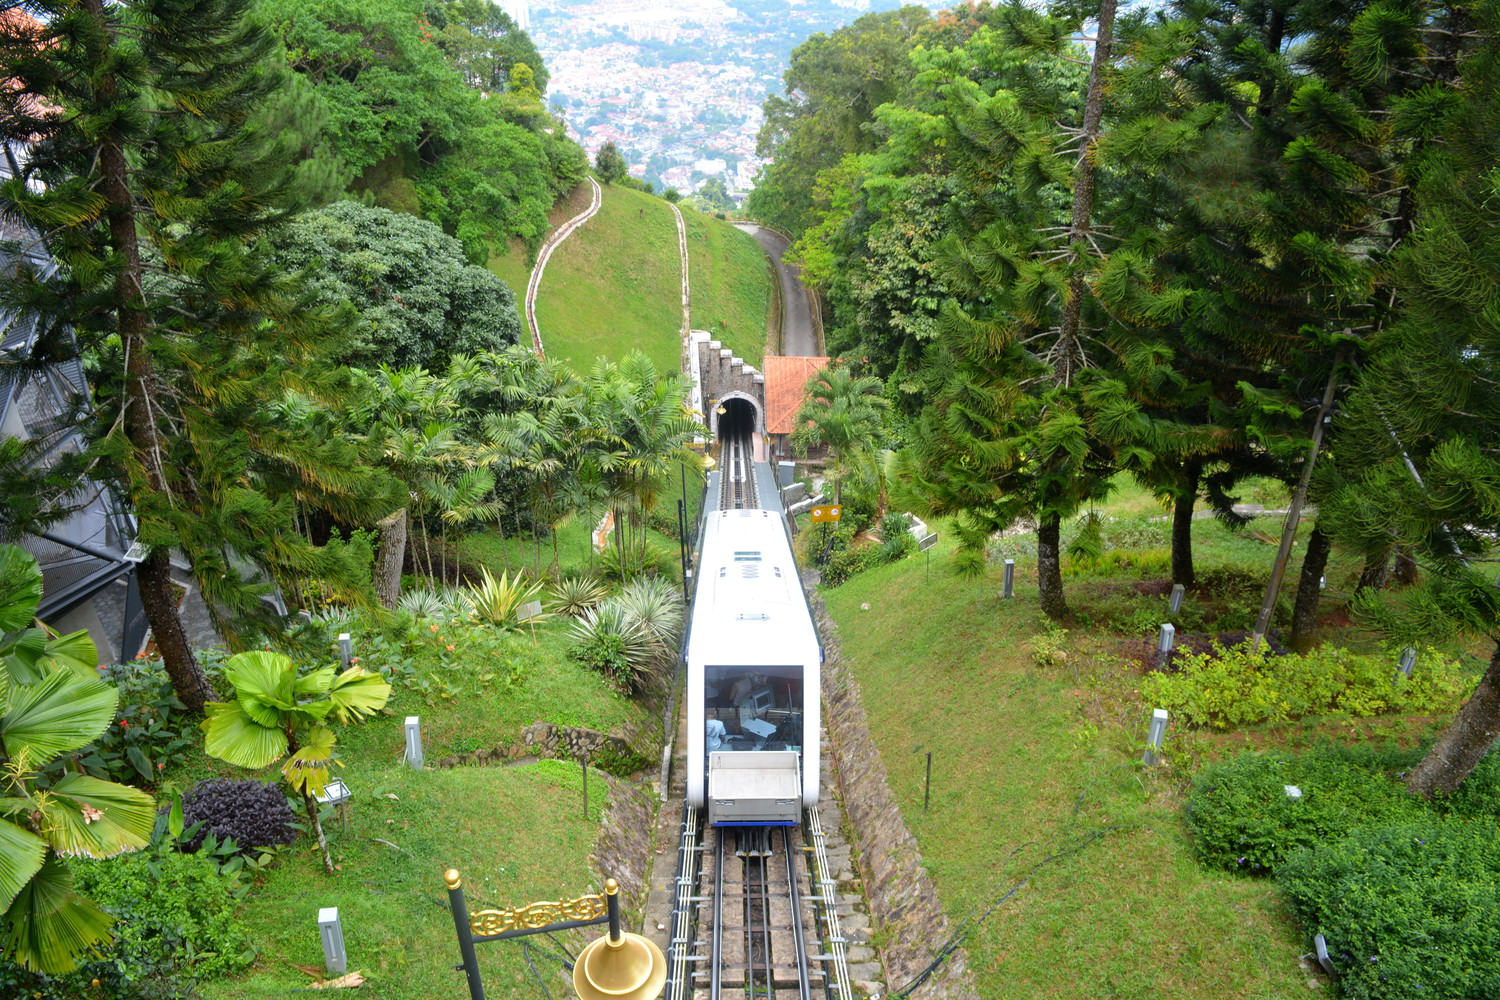 A funicular train that has appeared from a tunnel climbing up a green hill full of trees on both sides of the railway track